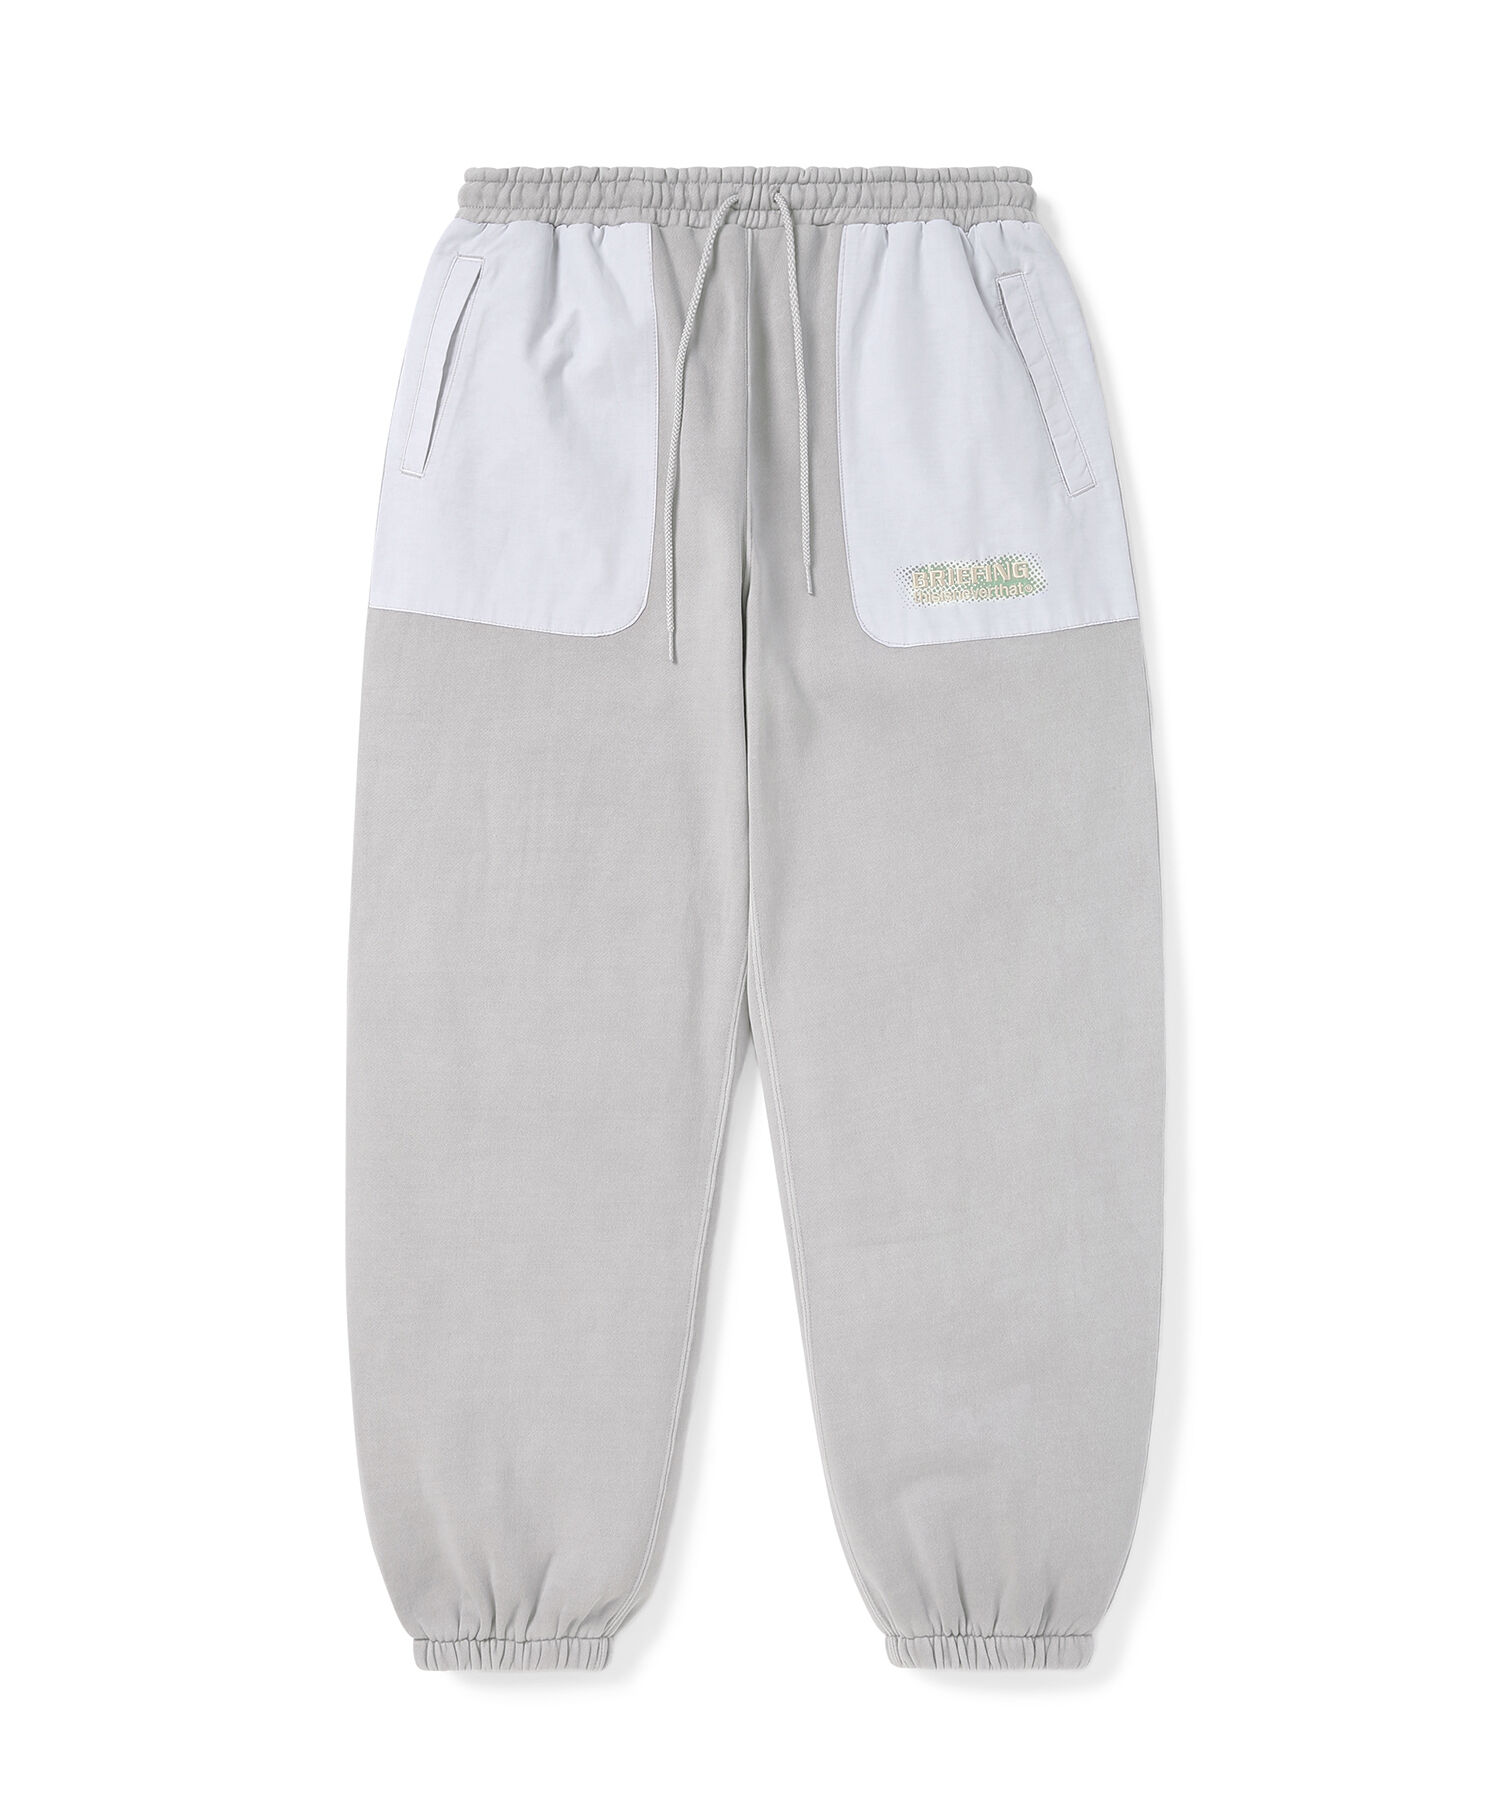 Buy TNT BF Sweat Pants for EUR 124.50 | BRIEFING